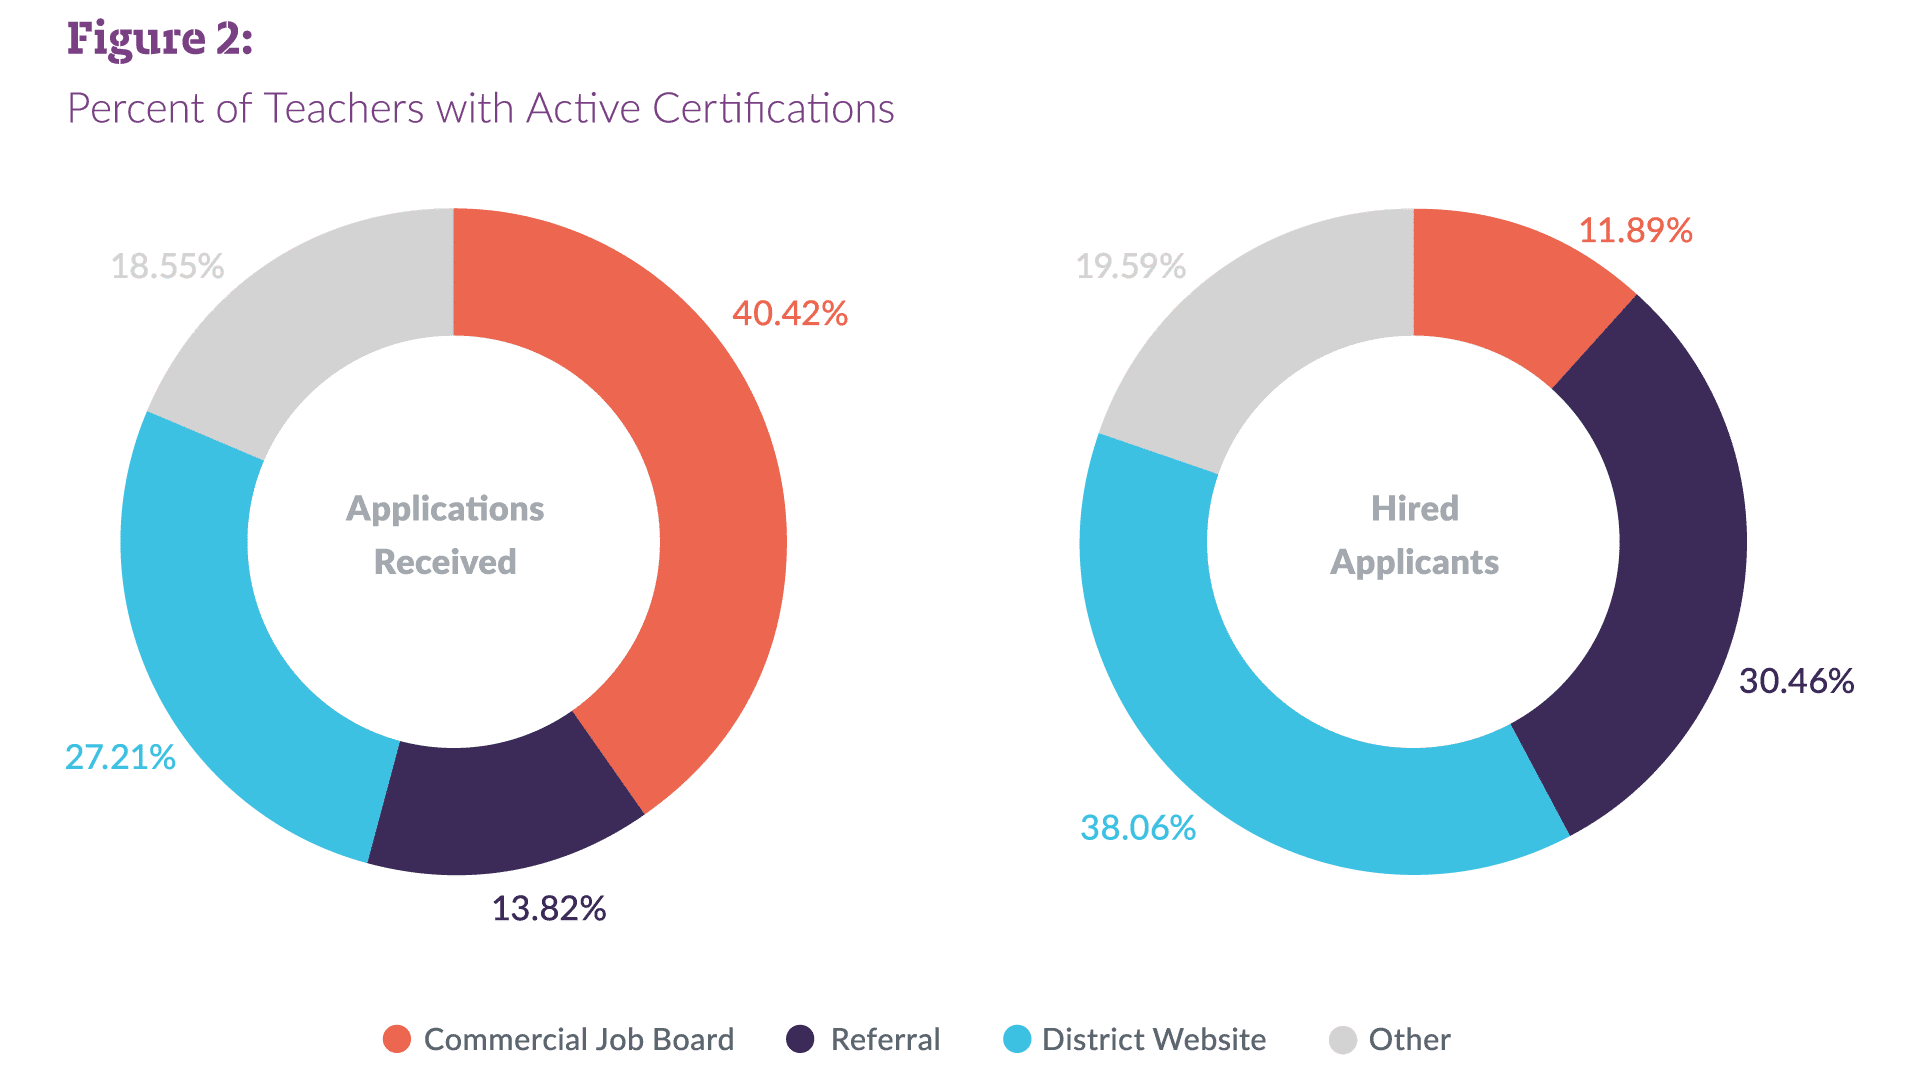 Chart showing breakdown of percent of applicants by referral source